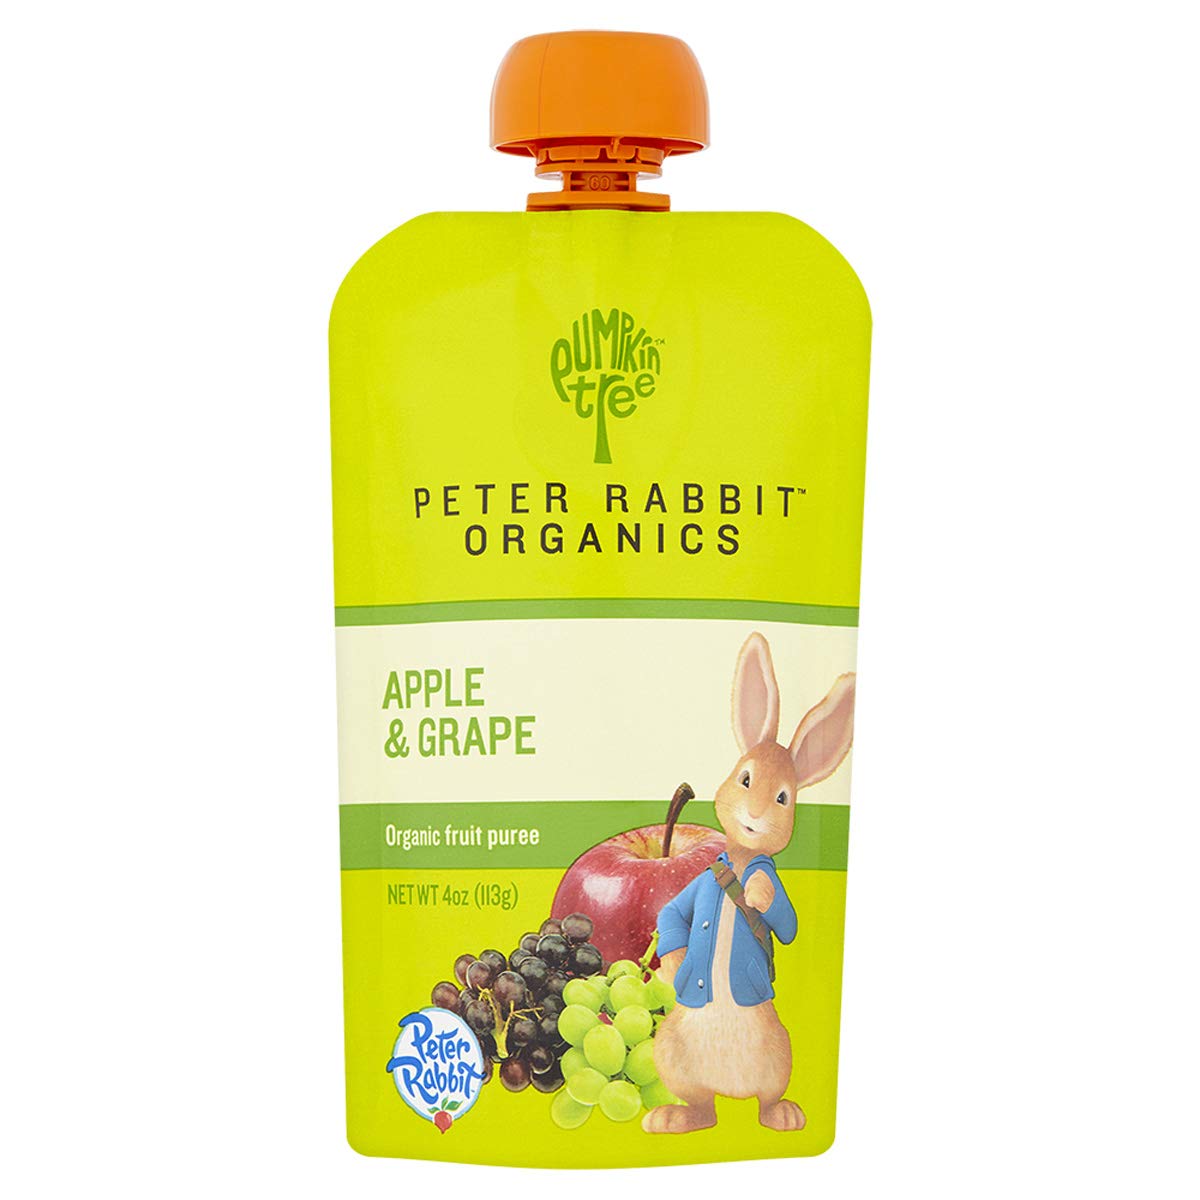 Peter Rabbit Organics, Organic Apple and Grape 100% Pure Fruit Snack, 4 Ounce (Pack of 10)